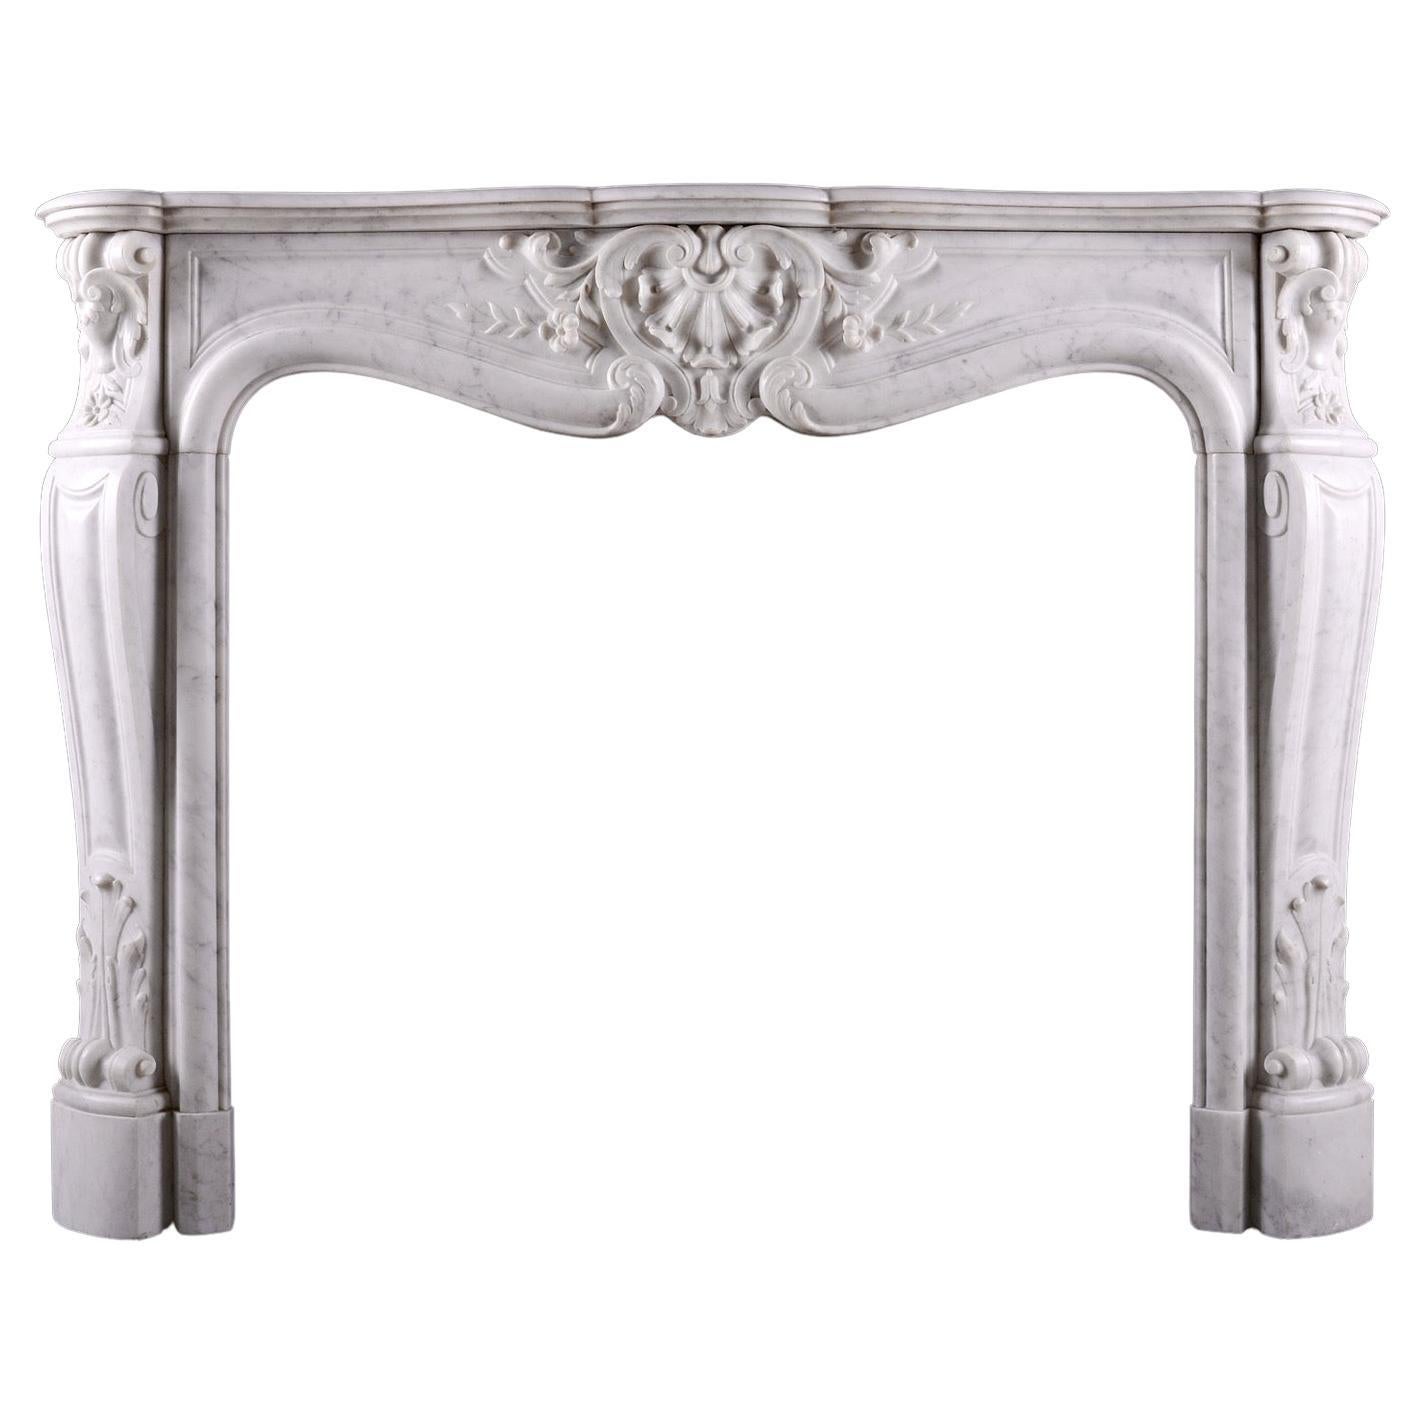 A French Marble Fireplace in Carrara Marble